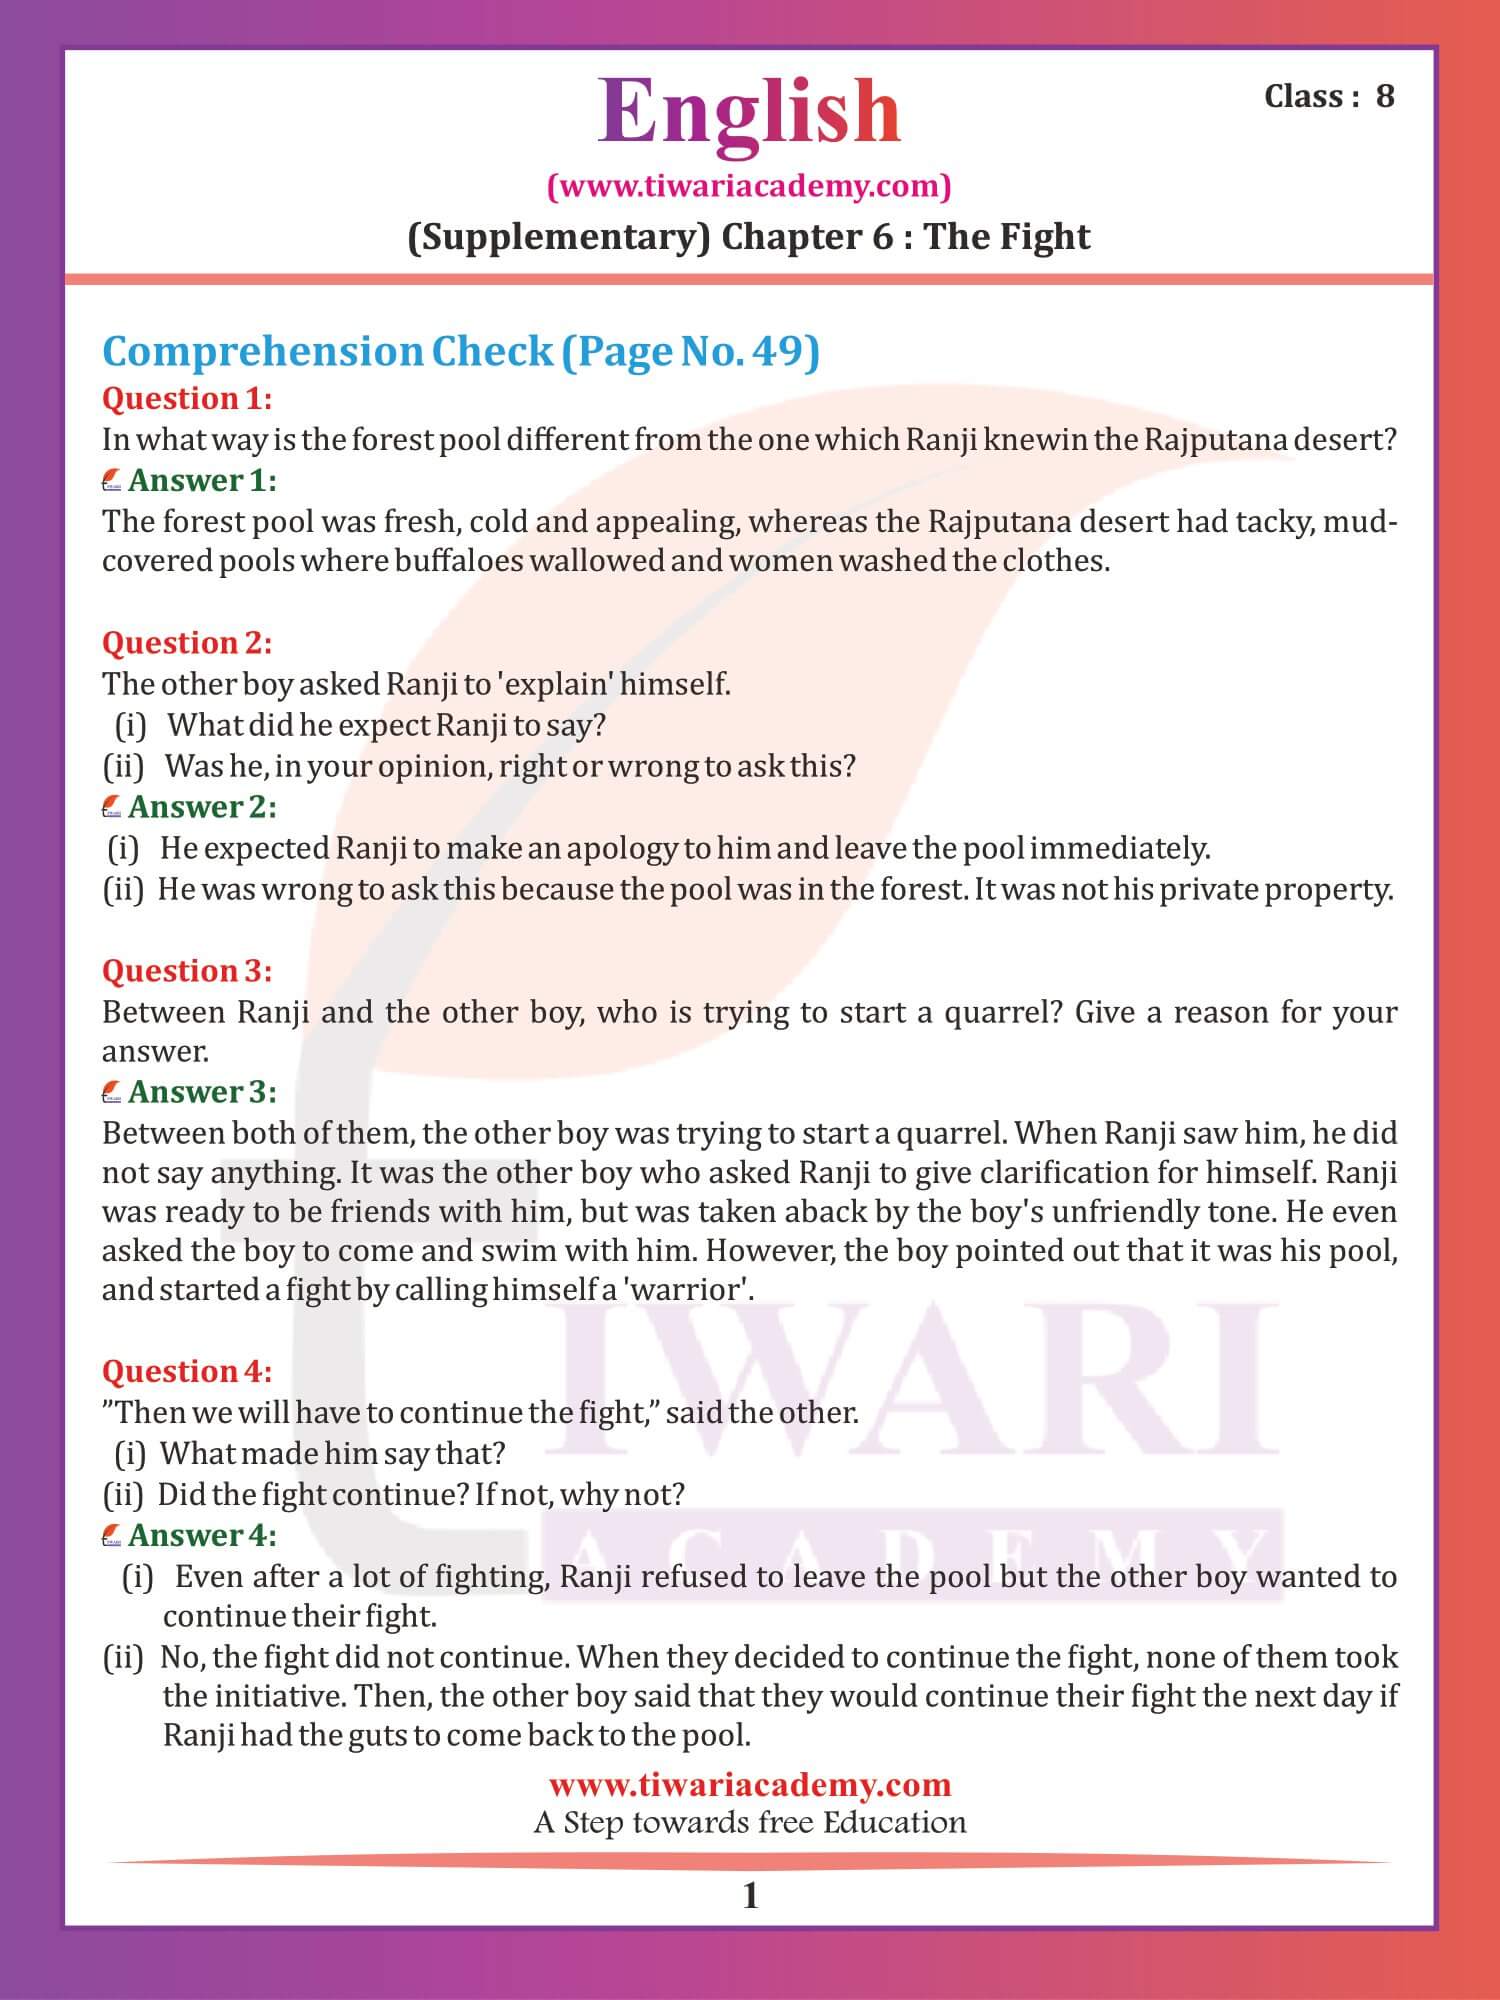 Class 8 English Supplementary Chapter 6 the Fight